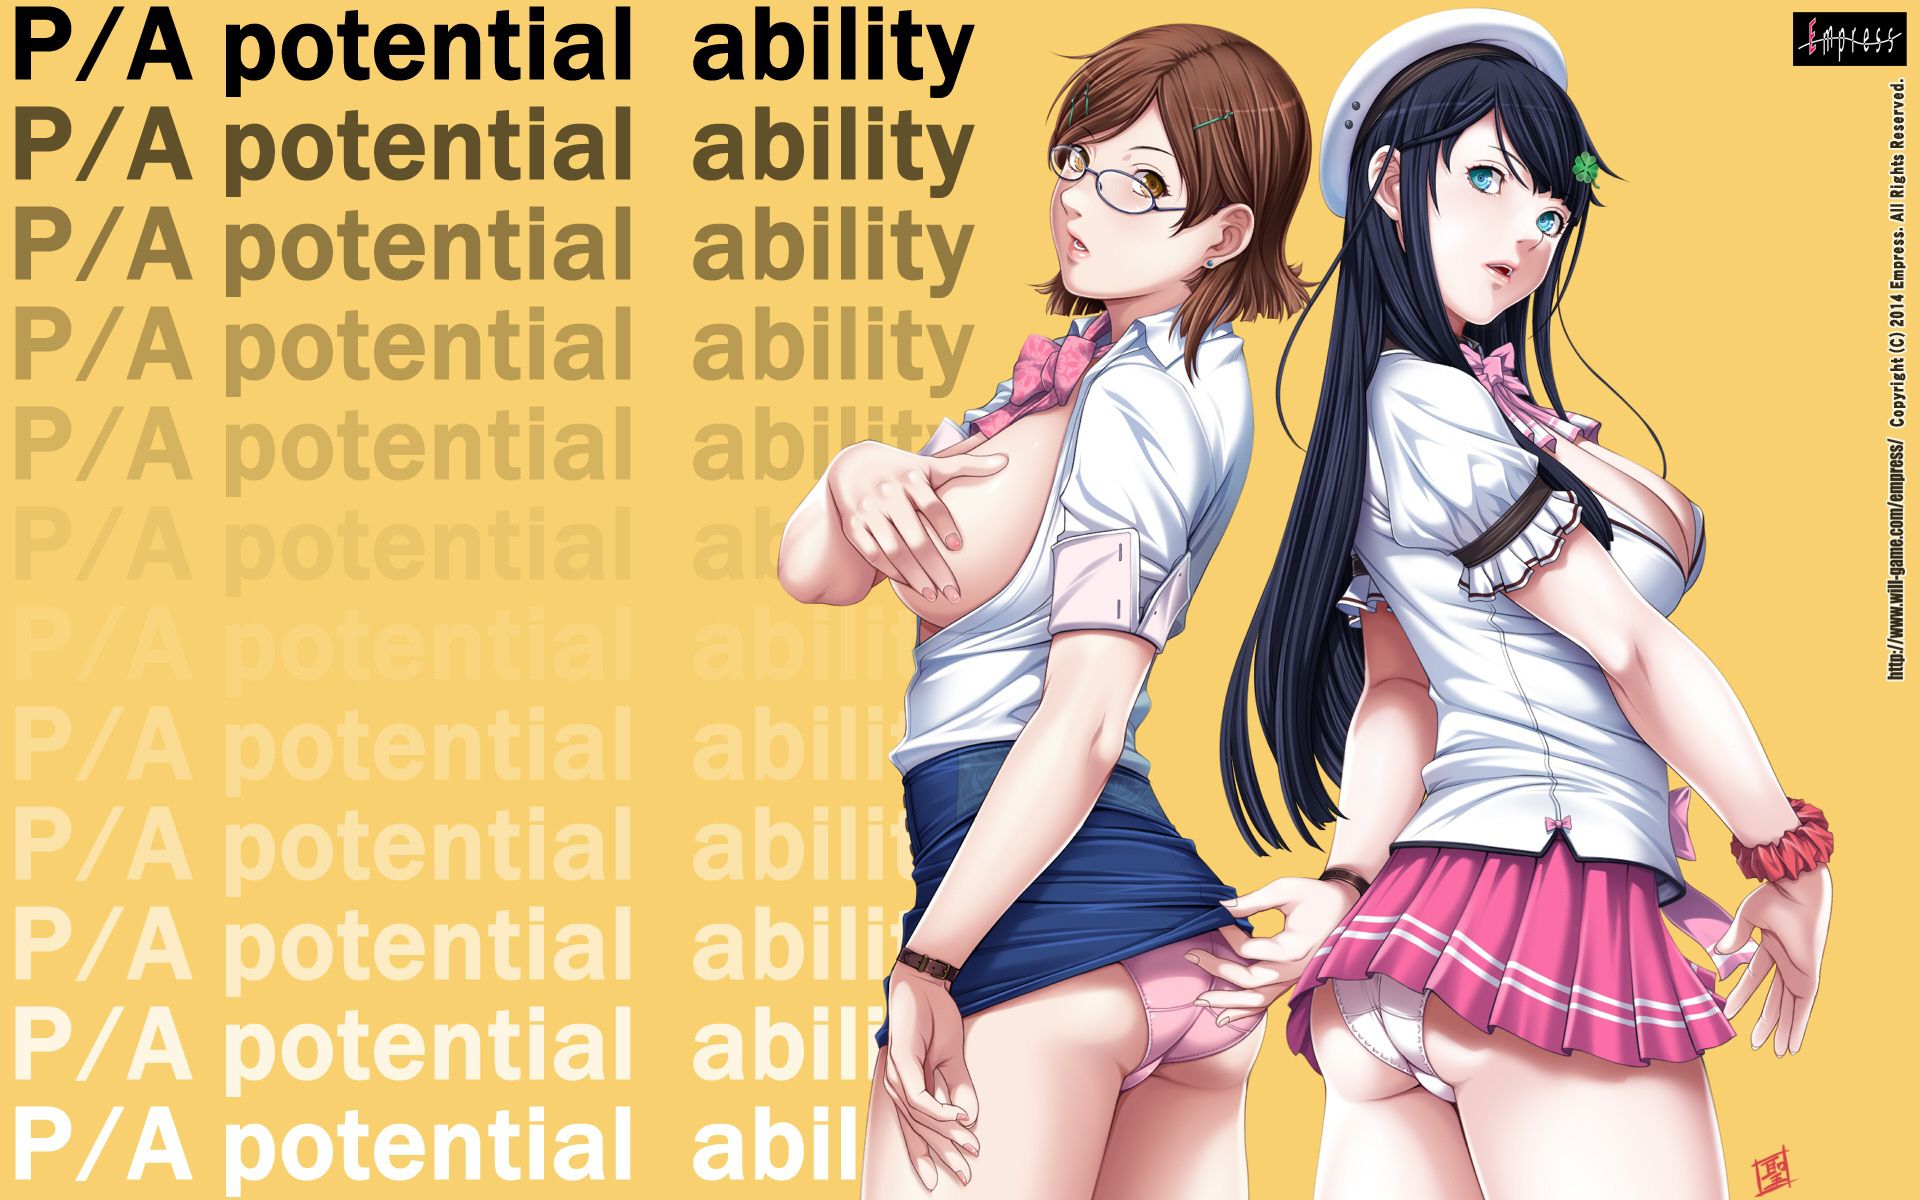 P/A-Potential Ability to [under age 18 prohibited eroge HCG] wallpapers, images 1